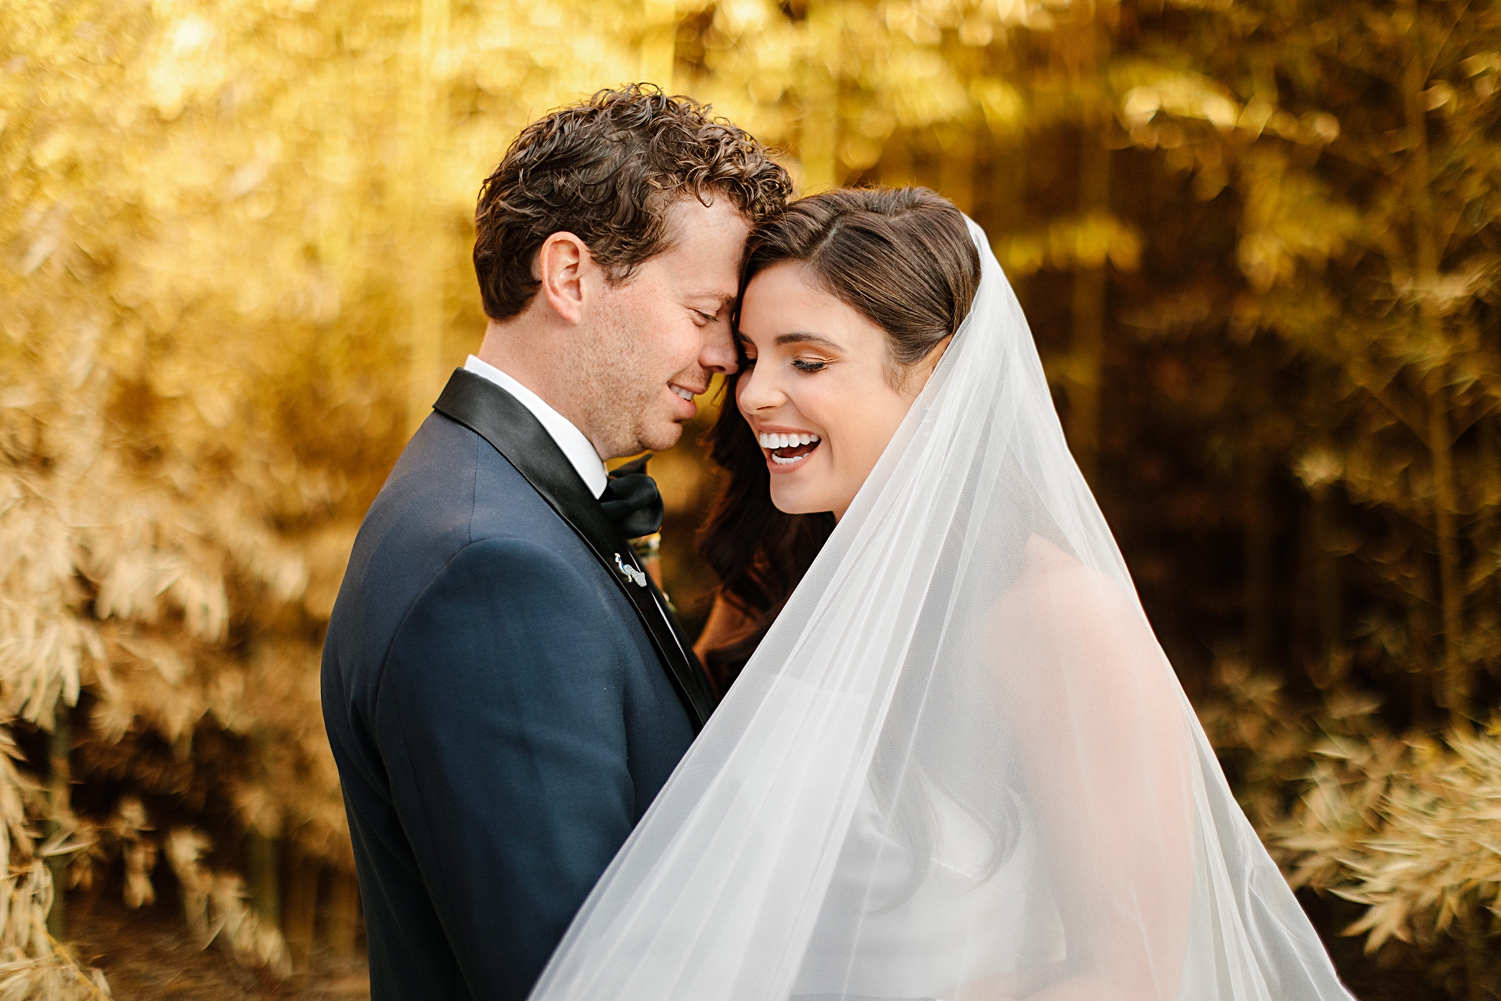 bride and groom embracing laughing behind veil in front of golden plants matties austin wedding